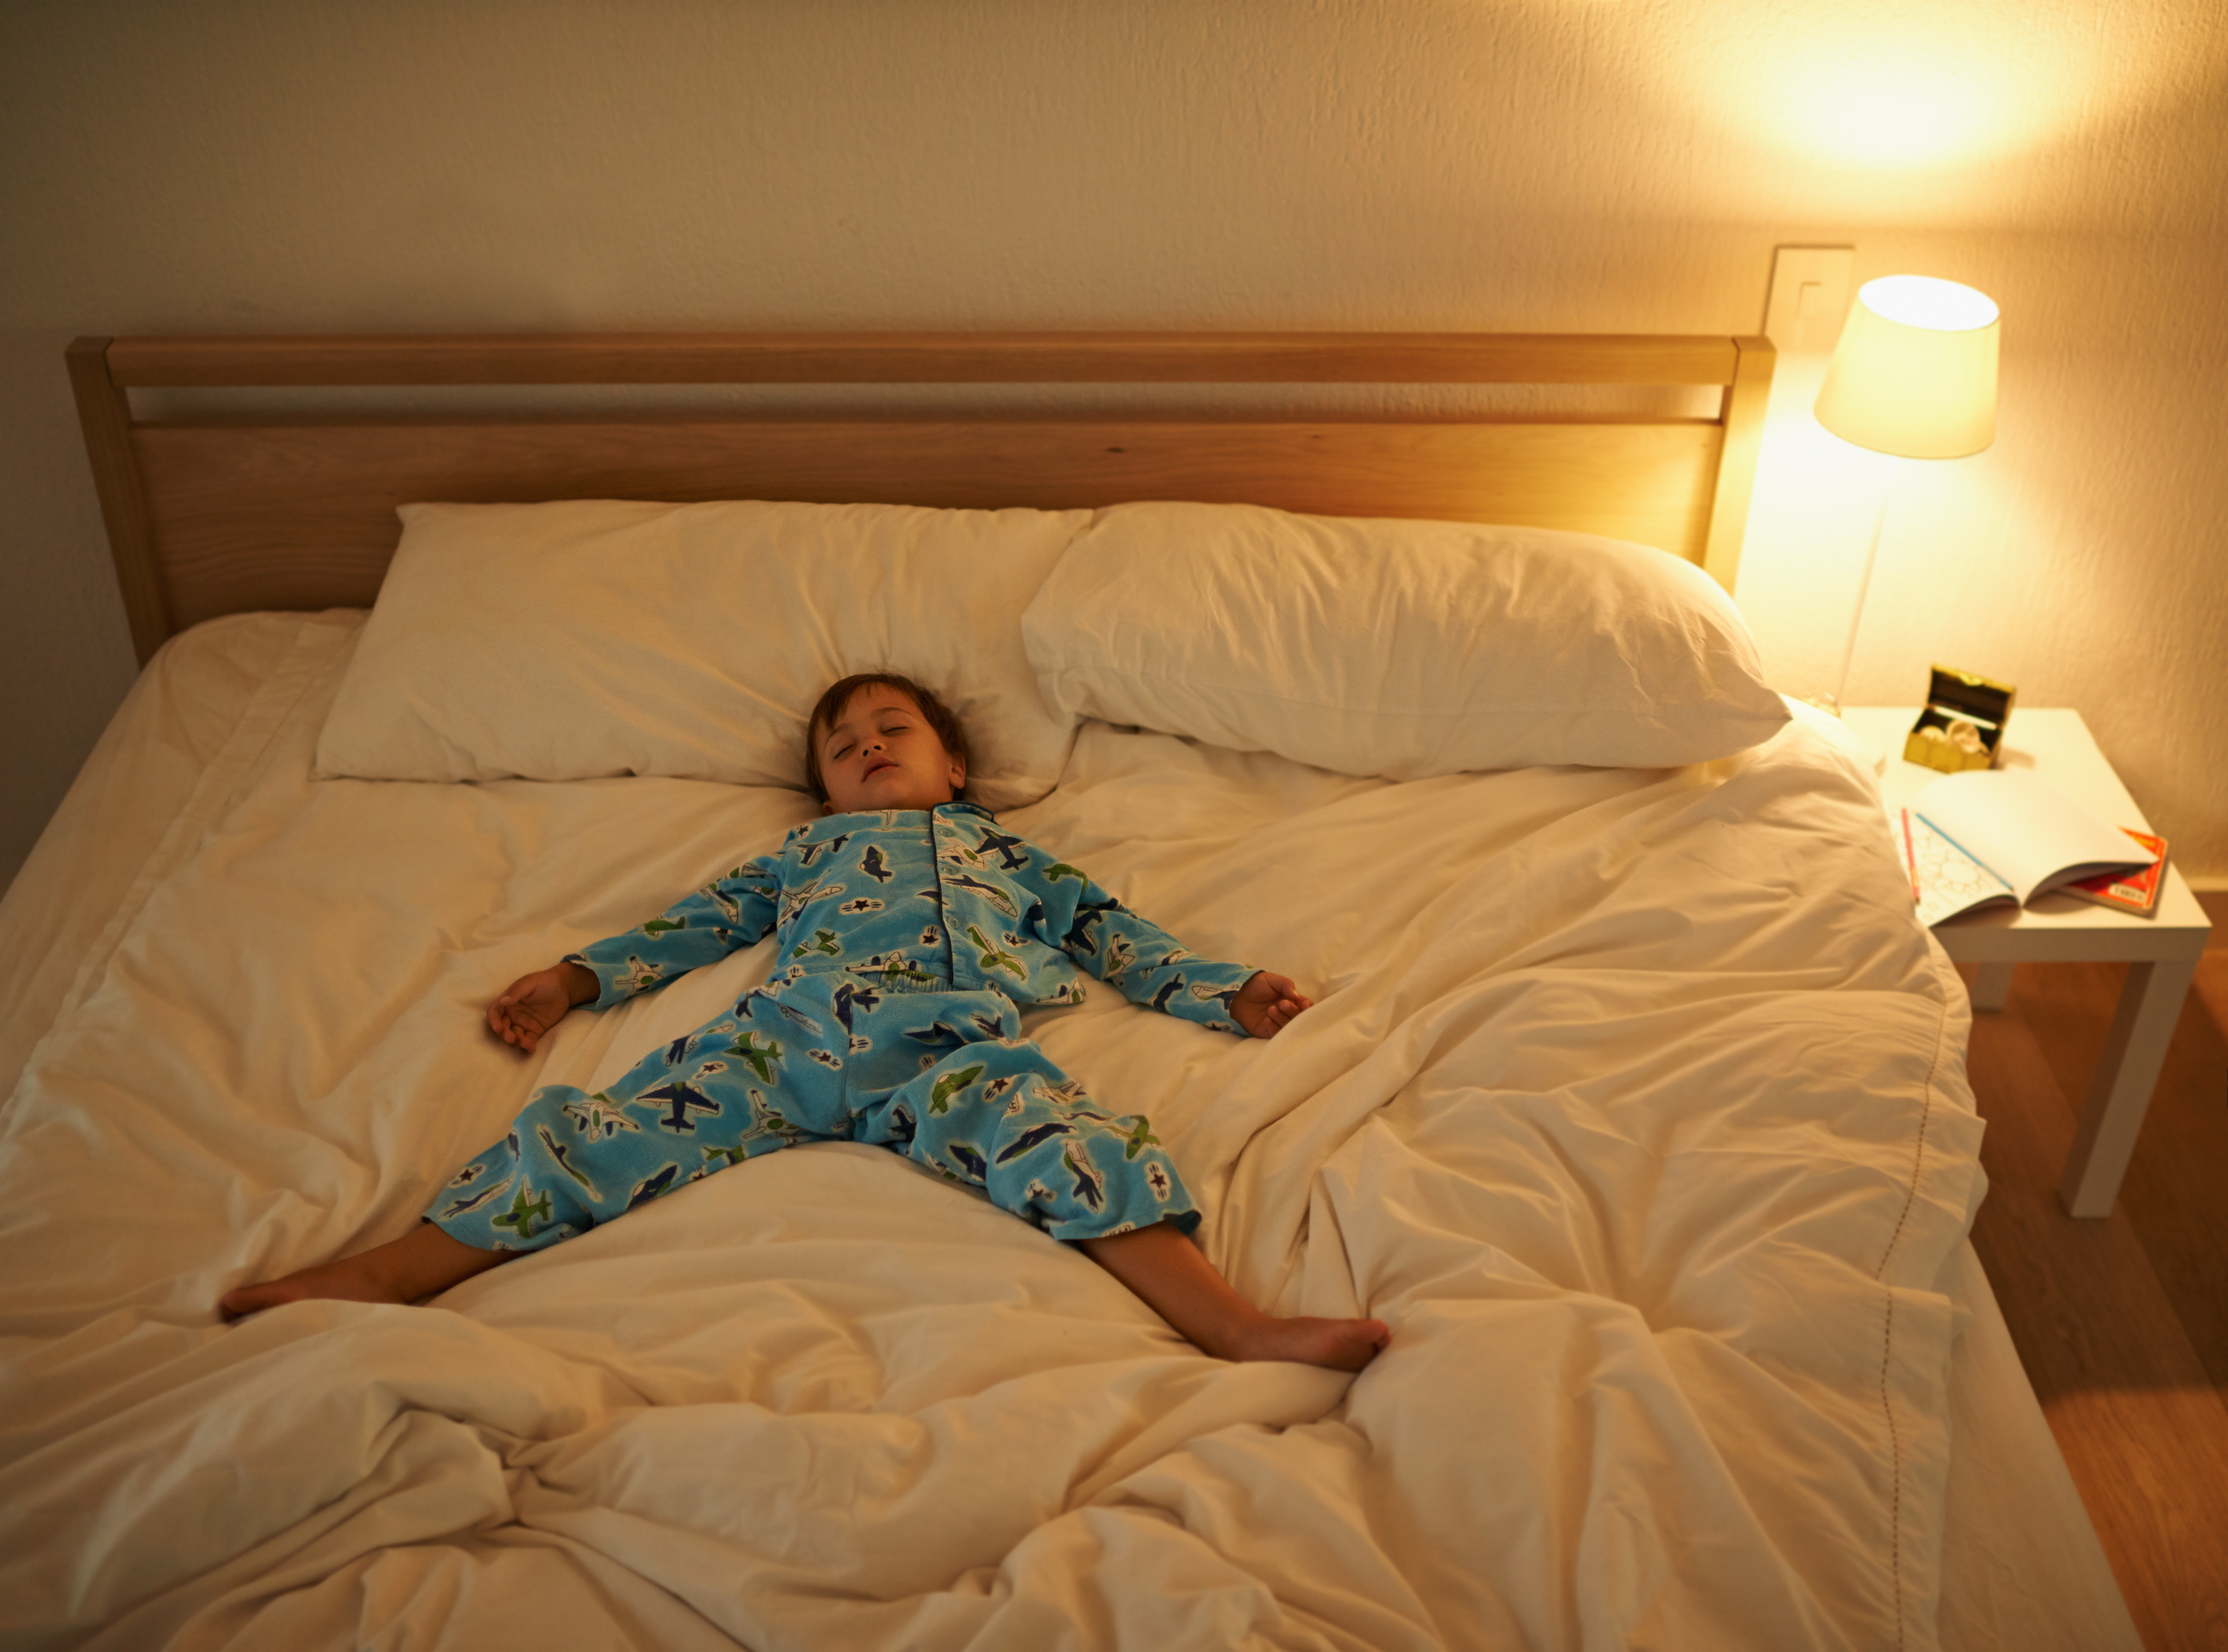 How to Foster Your Child’s Independence and Reclaim Your Bed